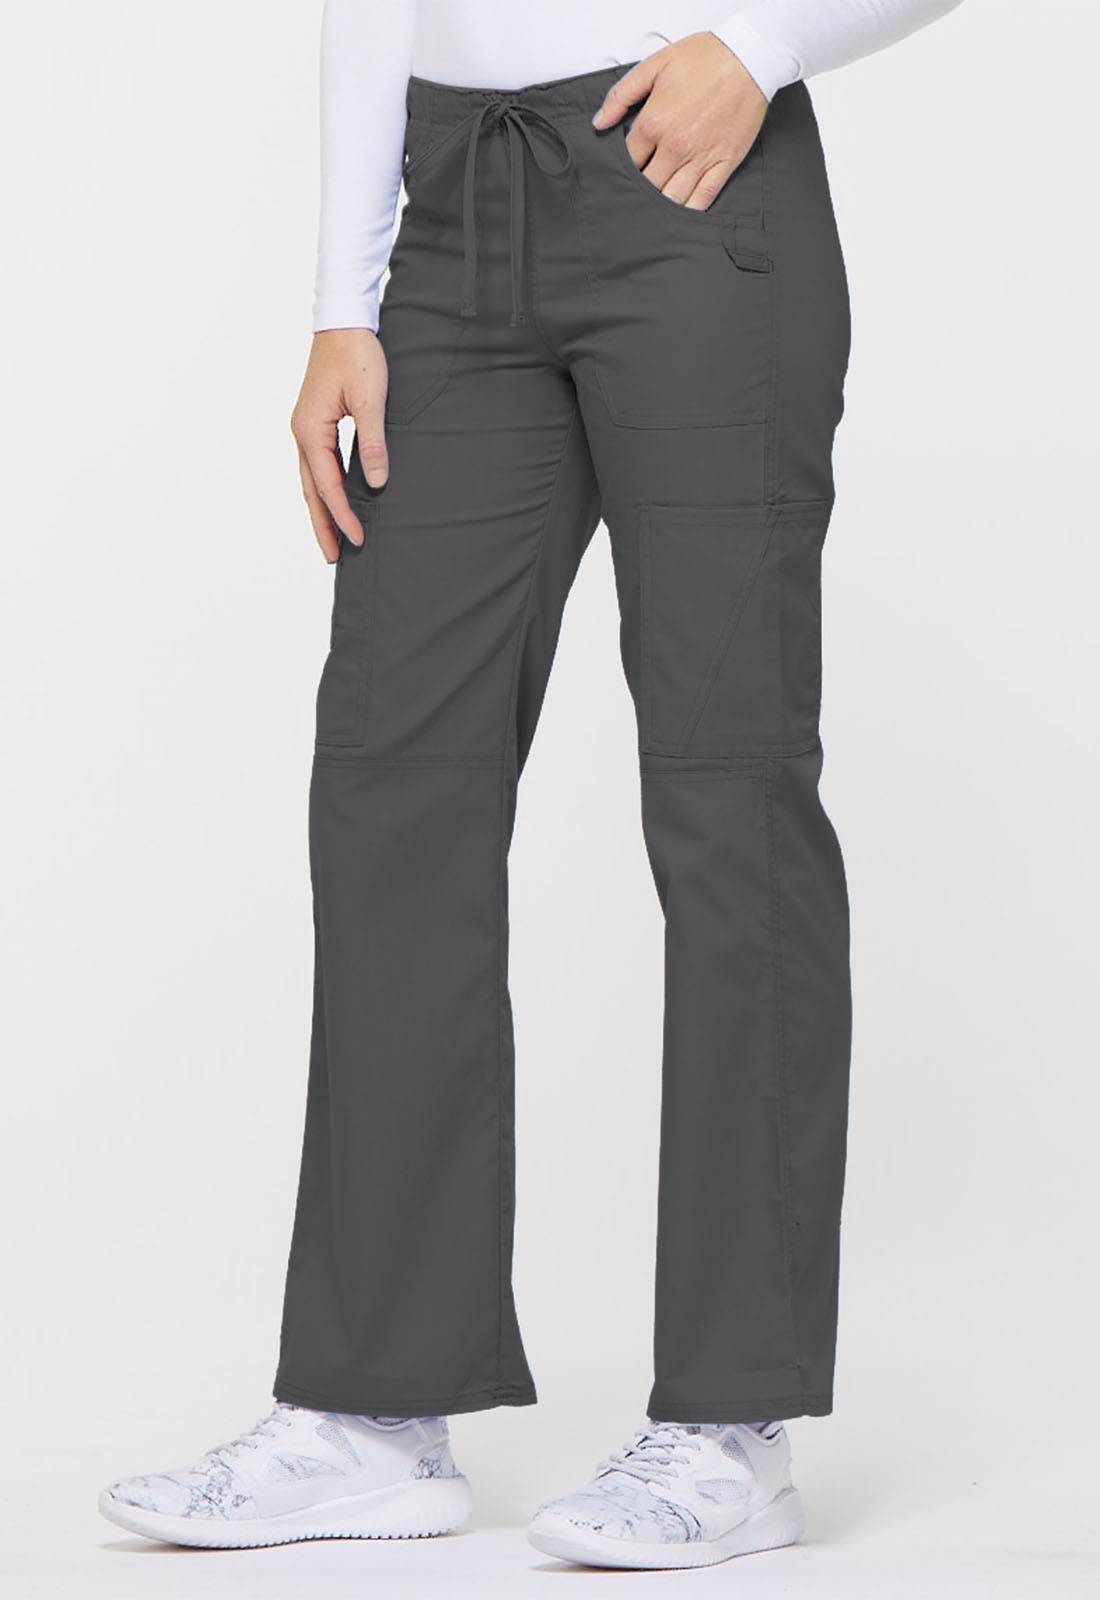 Dickies EDS Signature Drawstring Cargo Pant in Pewter from Dickies Medical